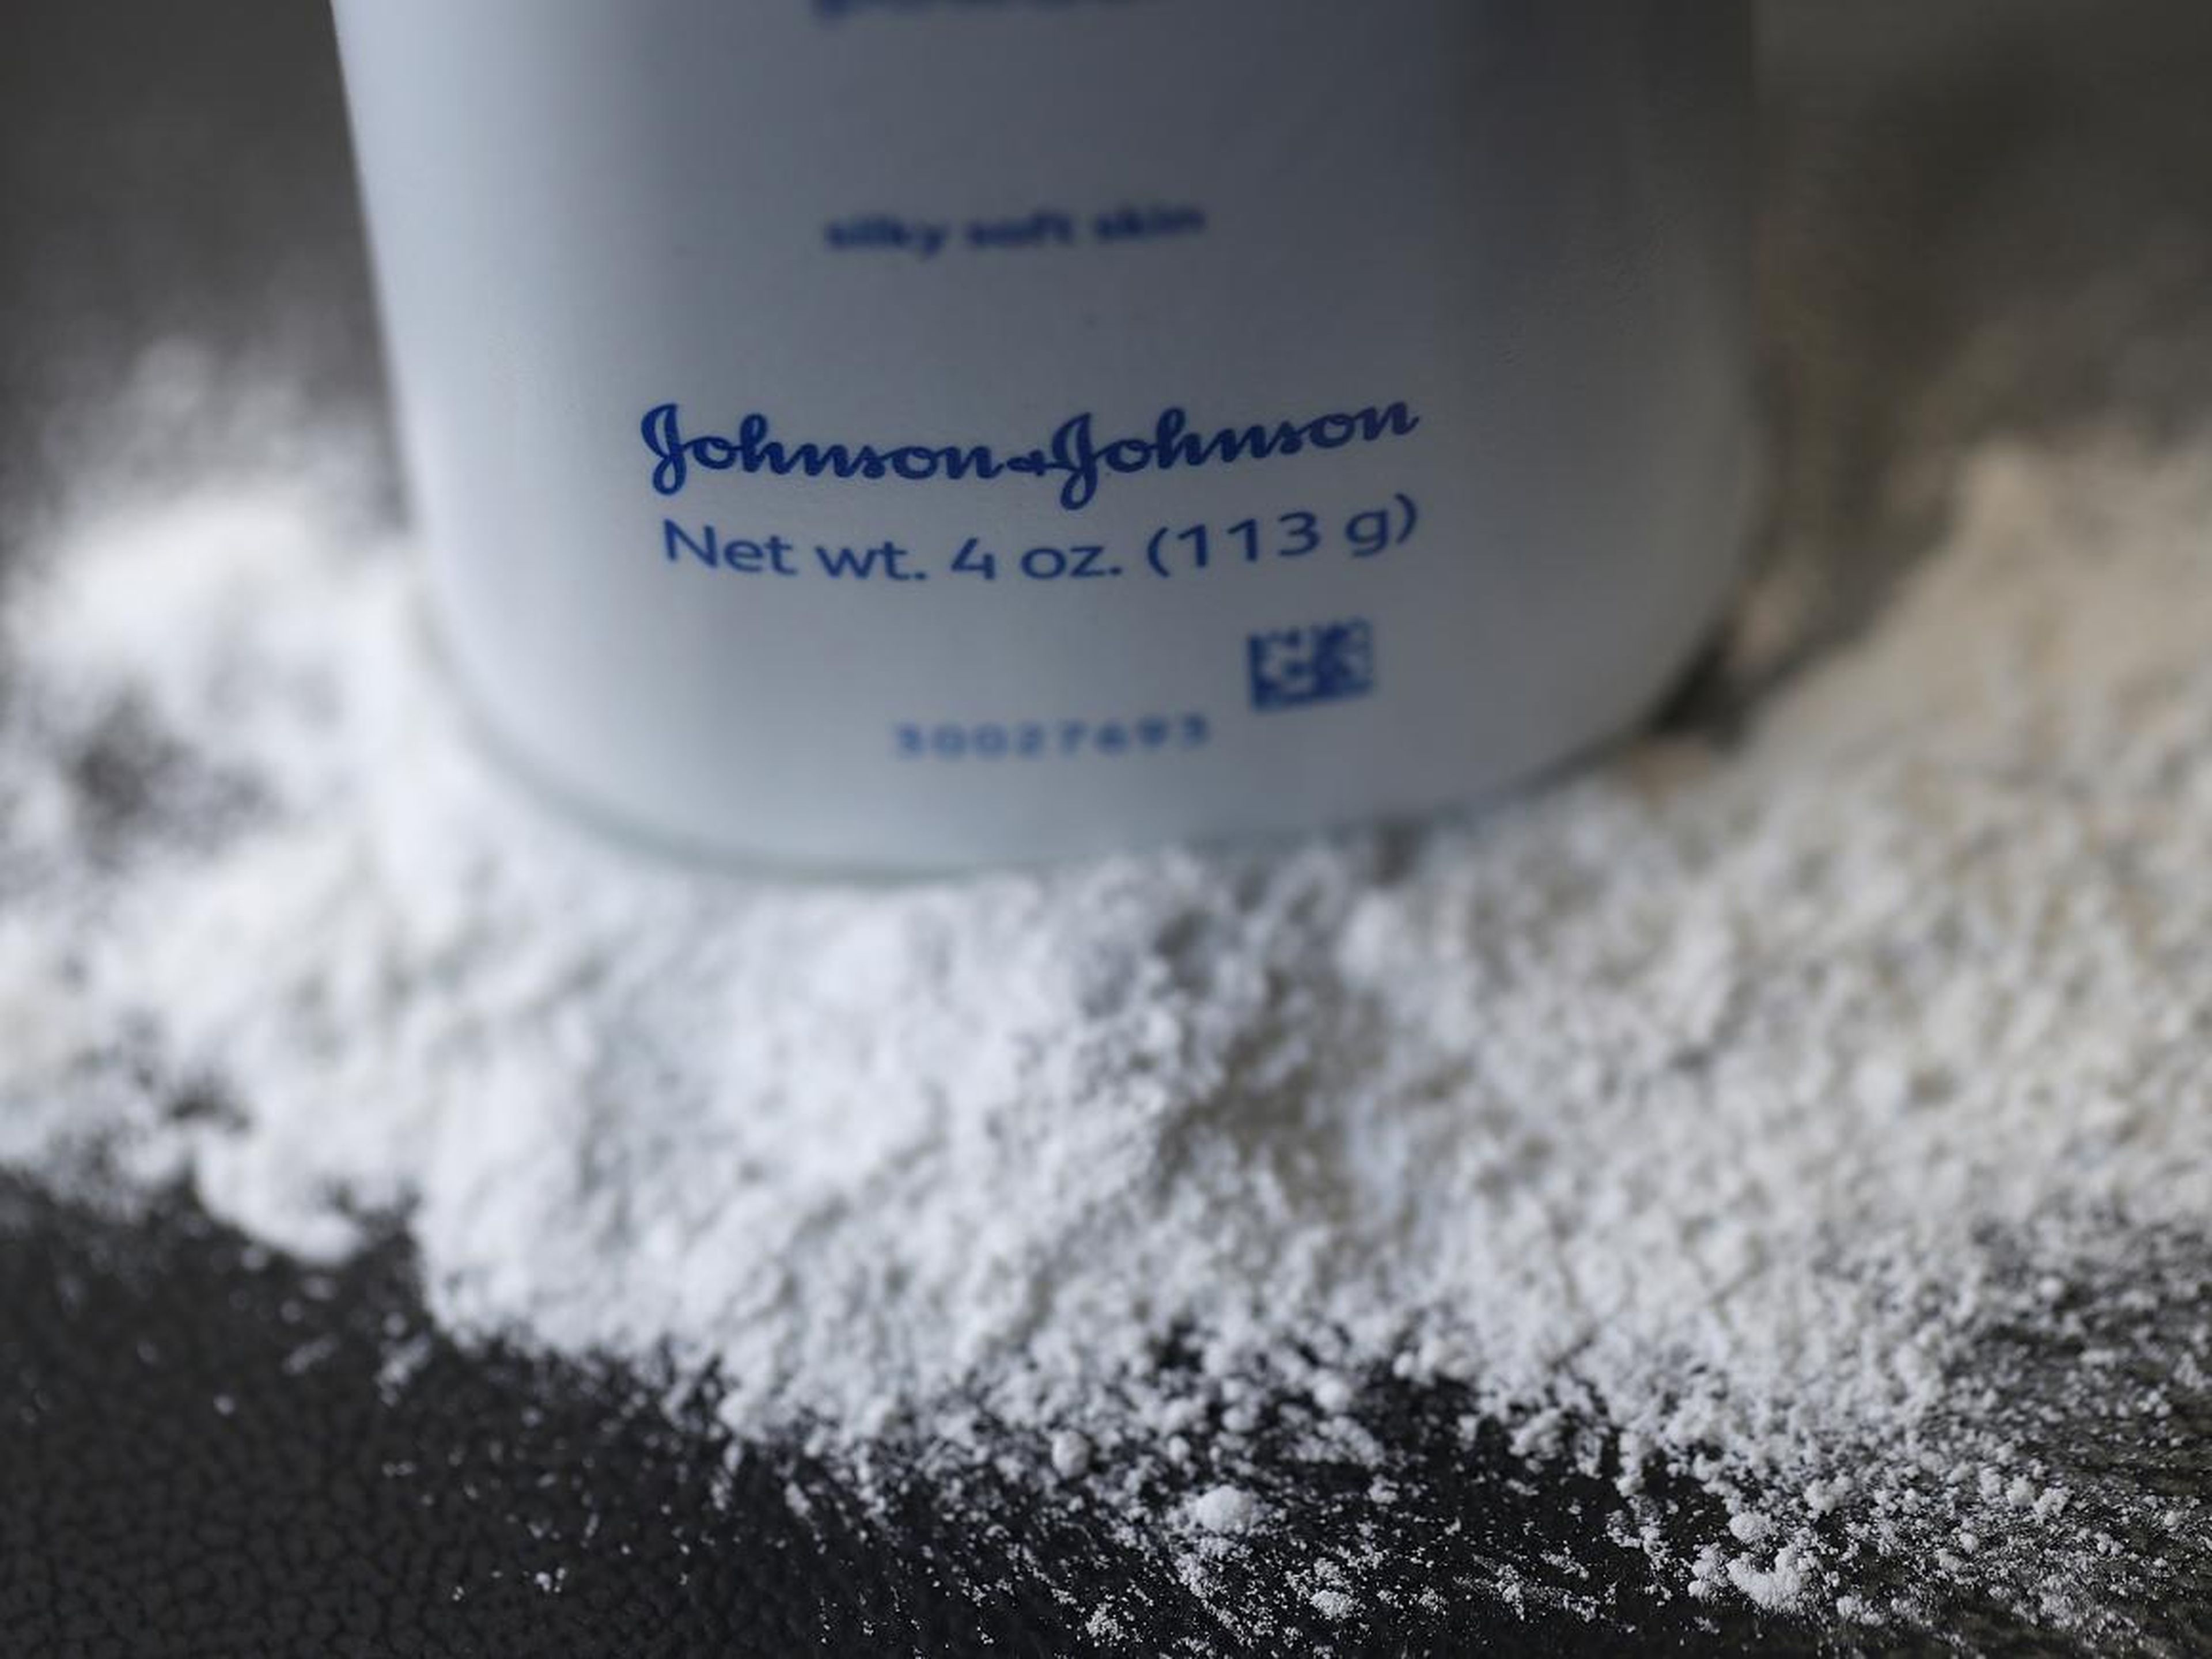 A container of Johnson's baby powder made by Johnson & Johnson.